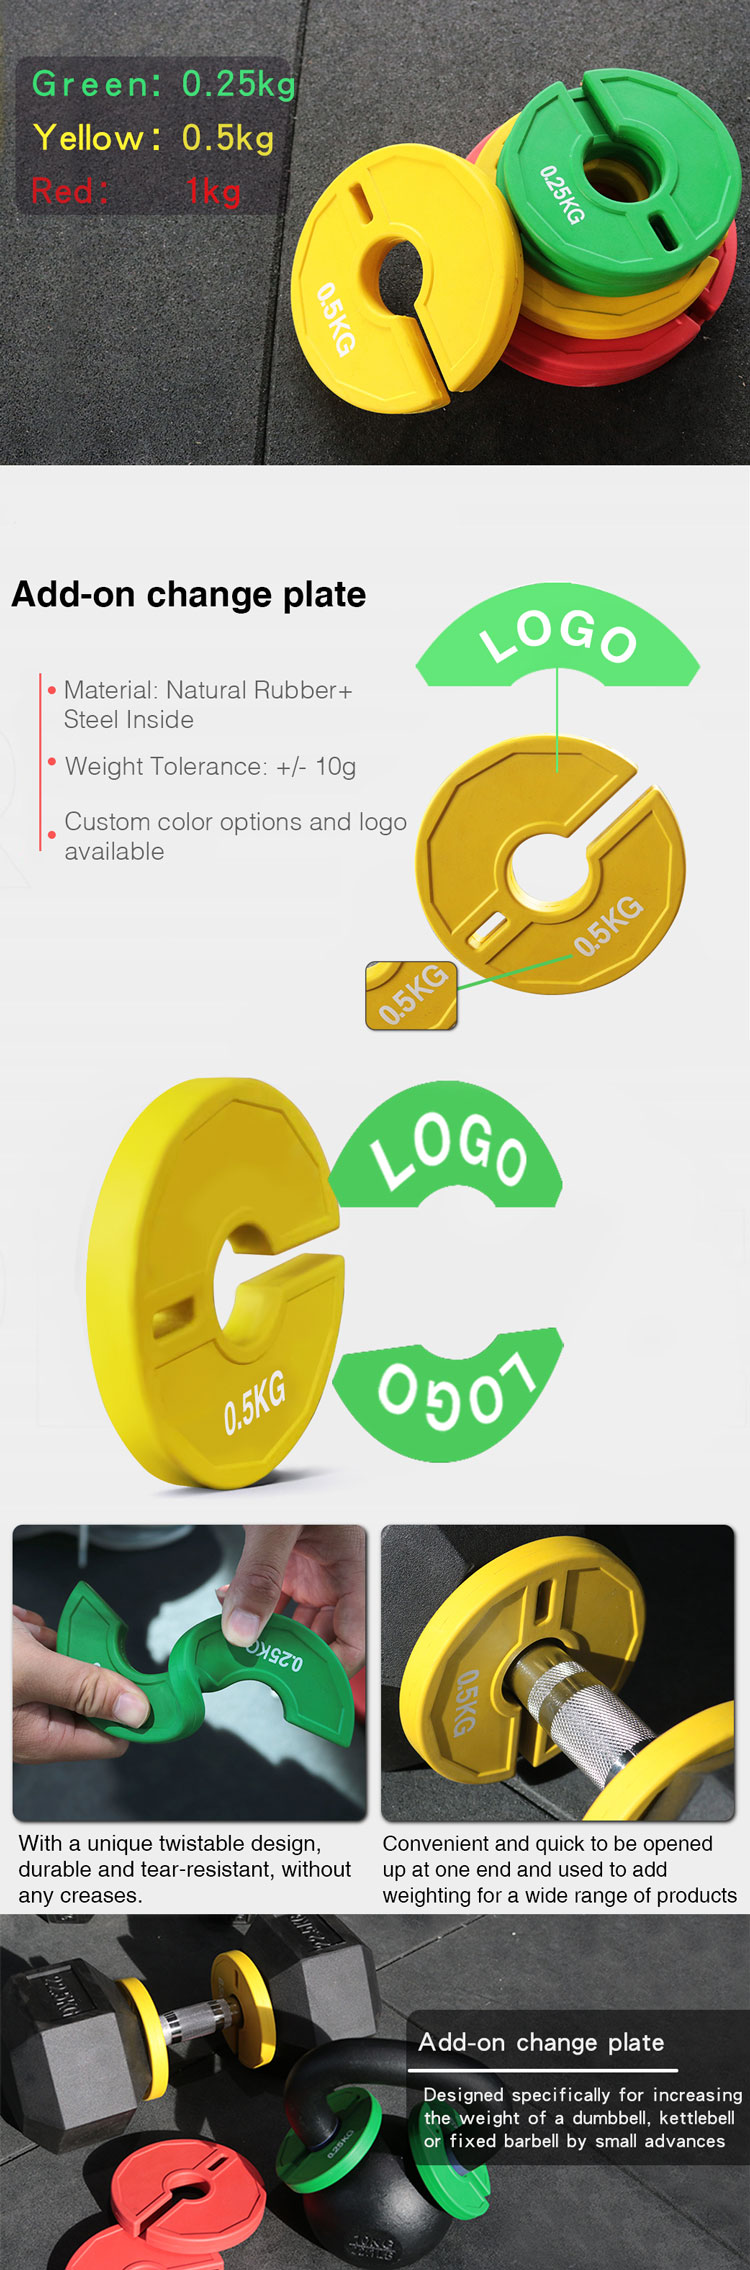 Add-On Change Plate Pair(图1)